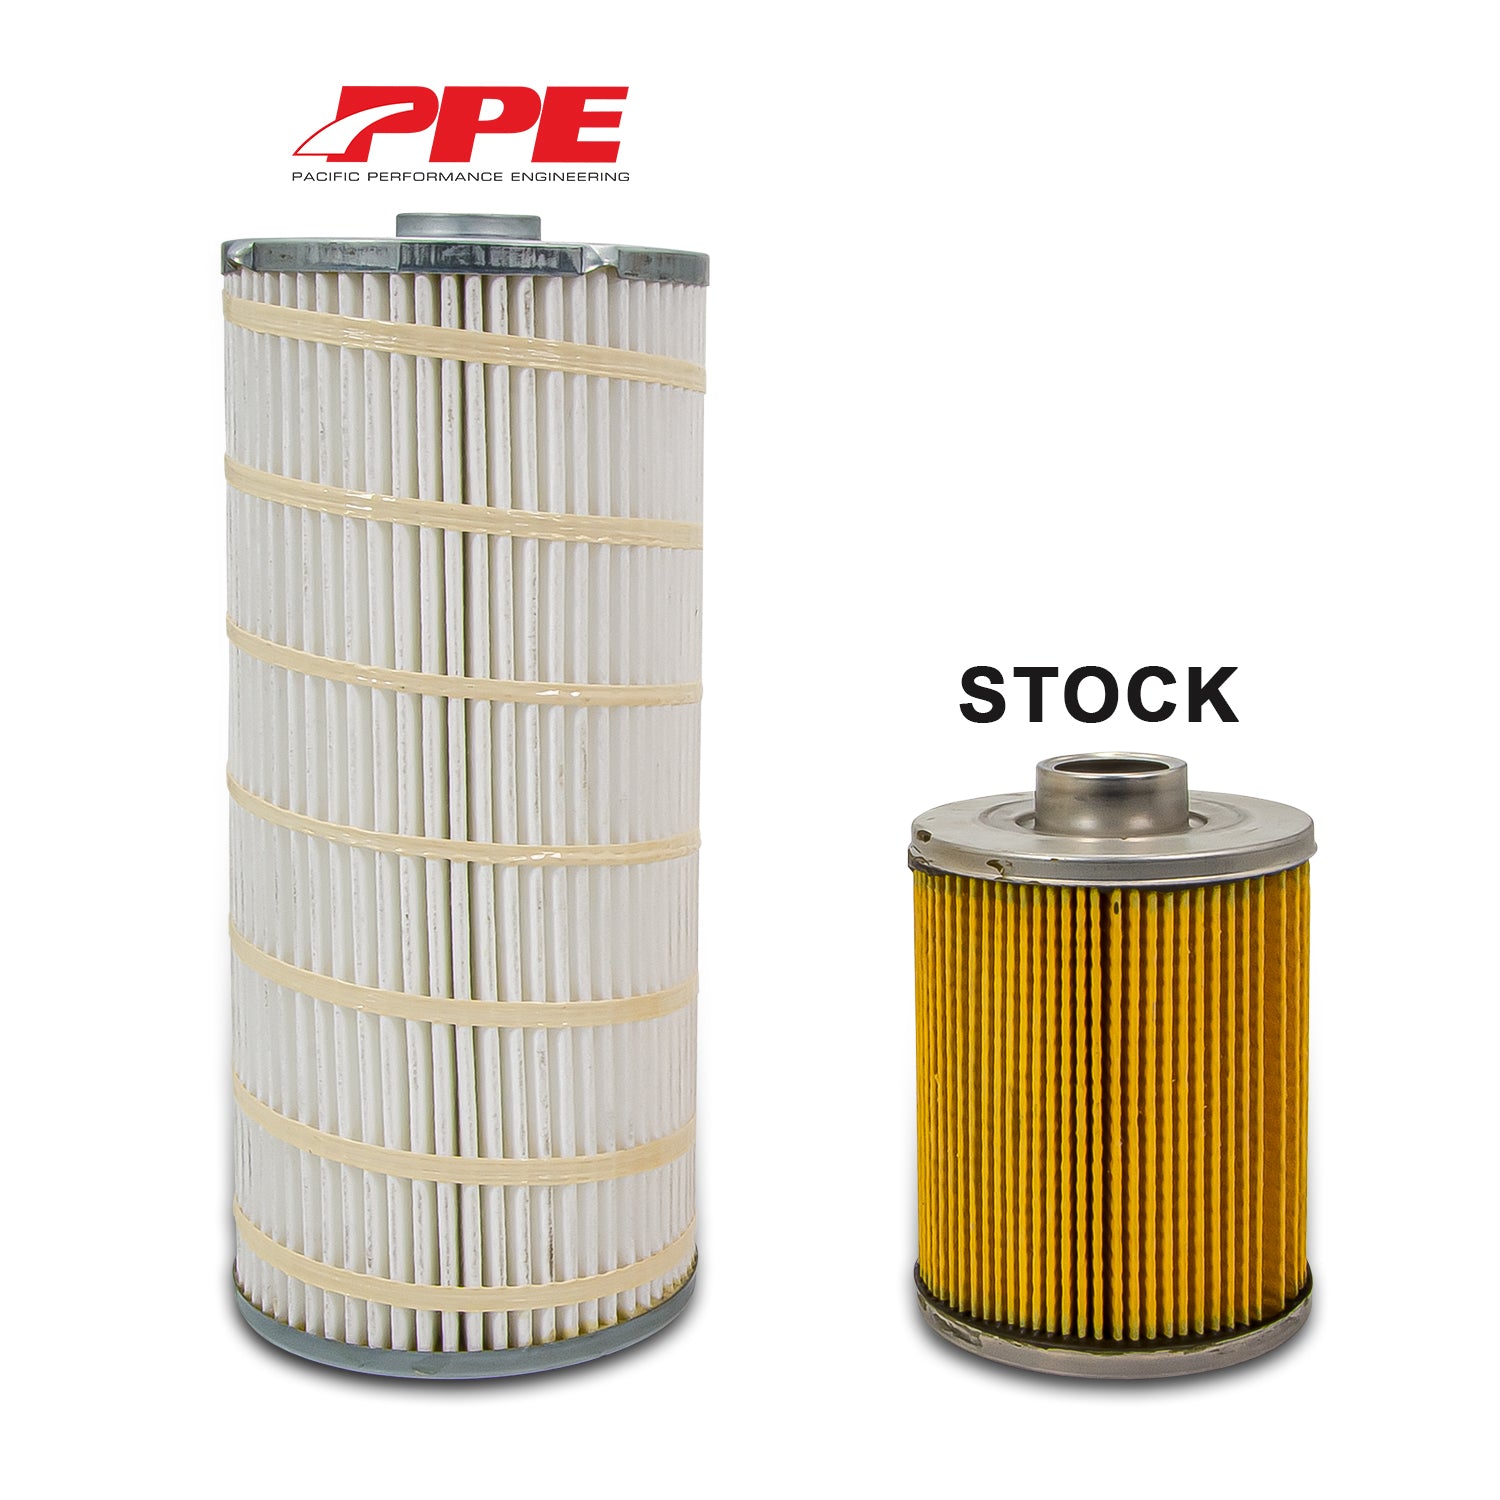 PPE Diesel 2001-2019 GM 6.6L Duramax Engine Oil Filter - MicroPure Extreme-Performance - Featuring TorqSTOP Technology 114000555